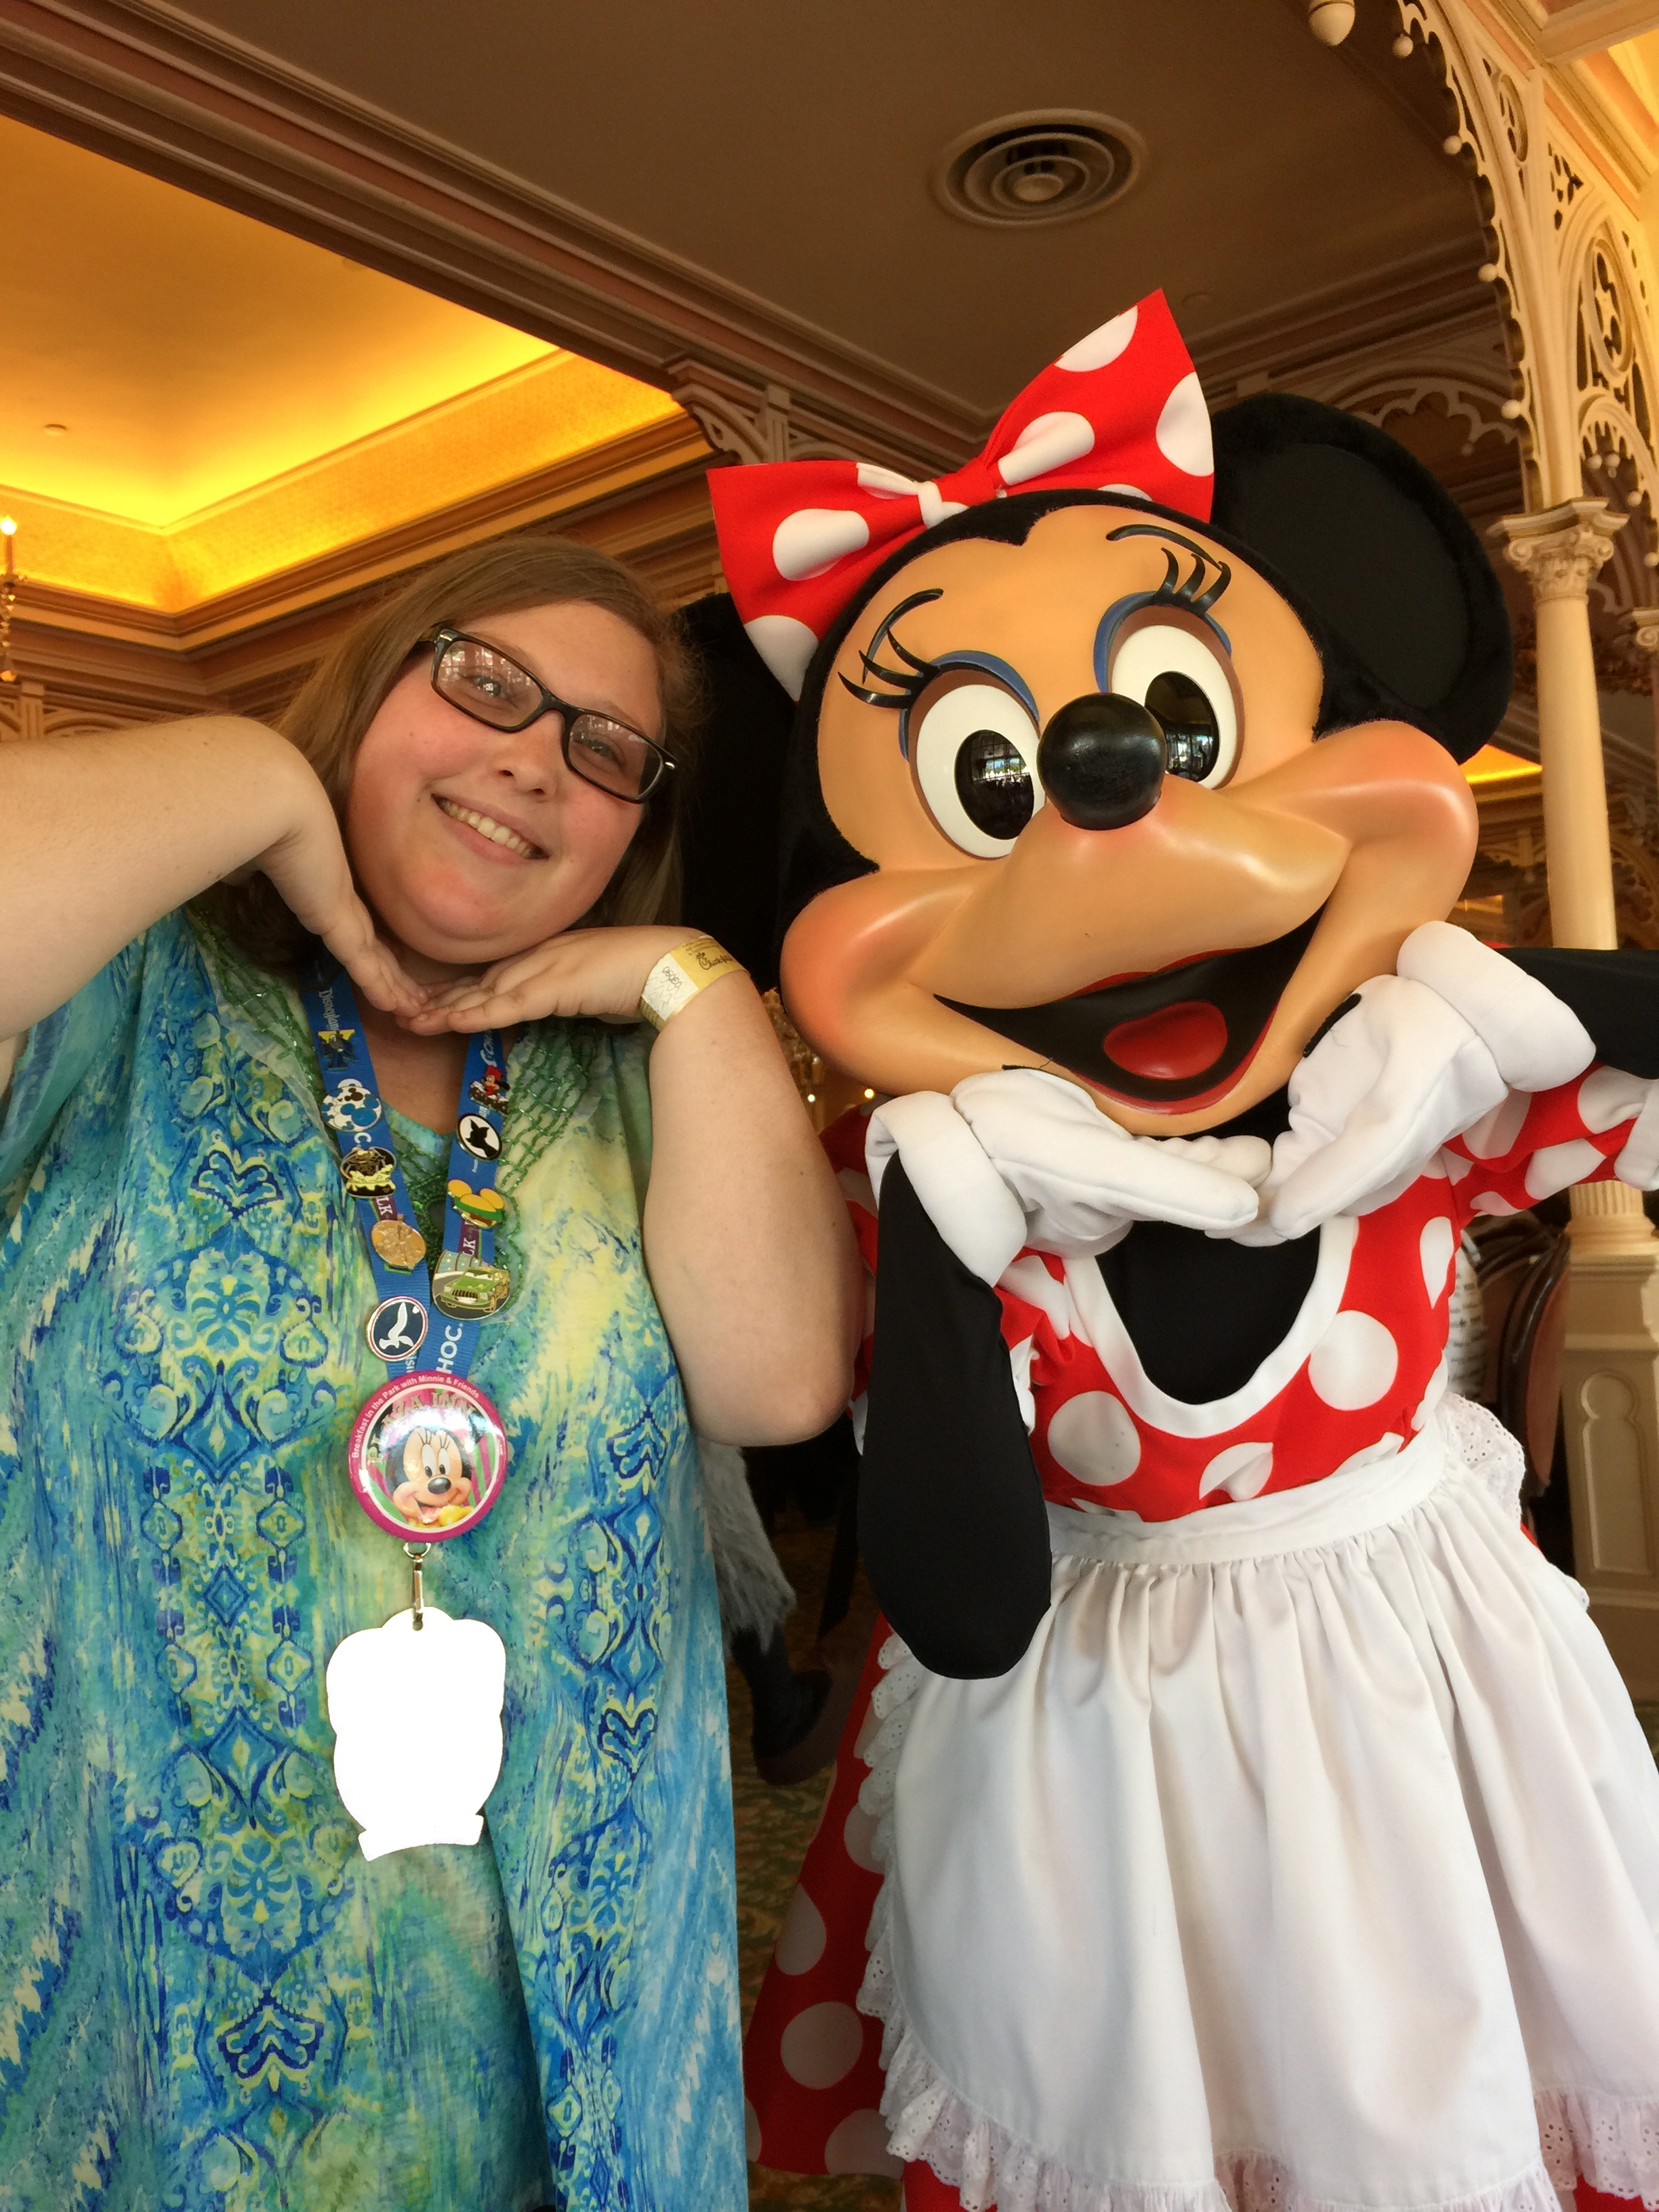 Dining Review of Character Breakfast with Minnie and Friends at the